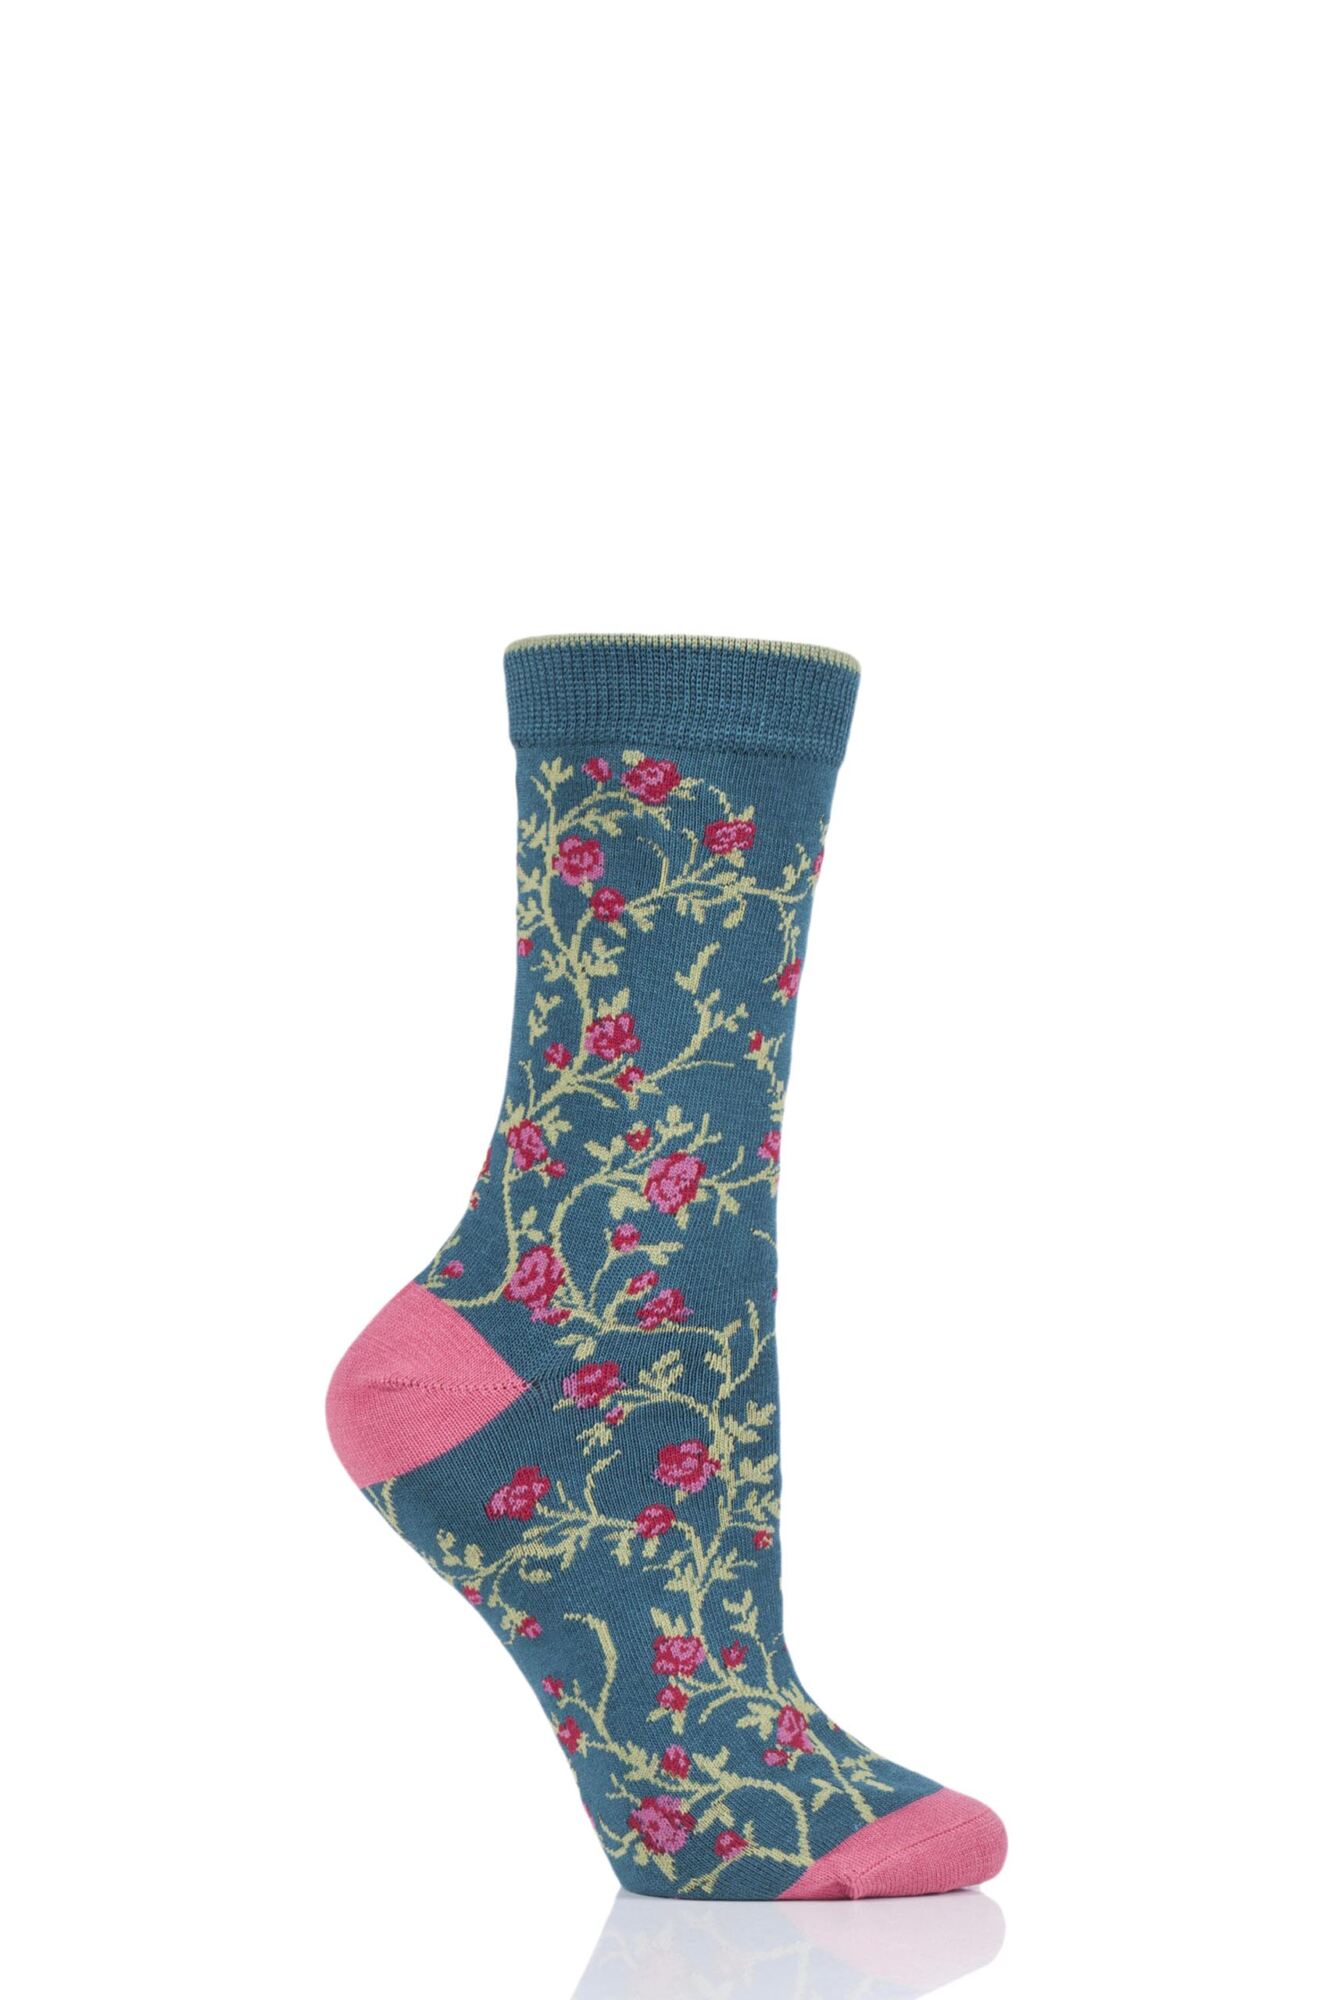  Ladies 1 Pair Thought Floreale Flower Bamboo and Organic Cotton Socks